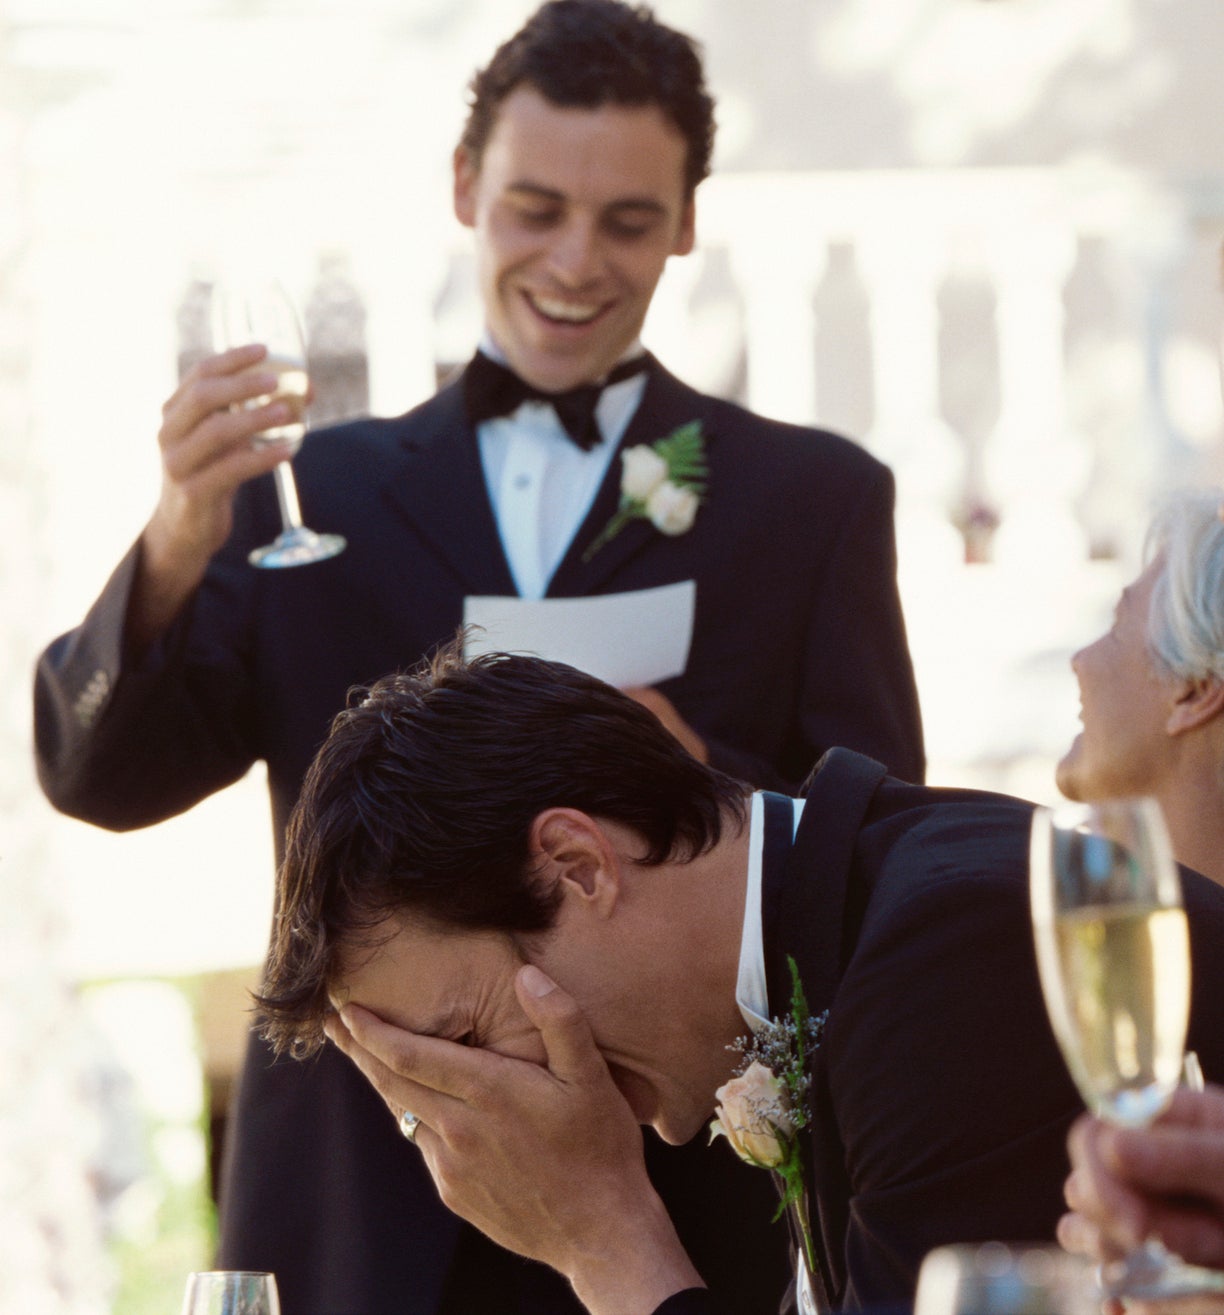 Groom laughing with hand on face, bride smiling beside him, man giving speech at wedding